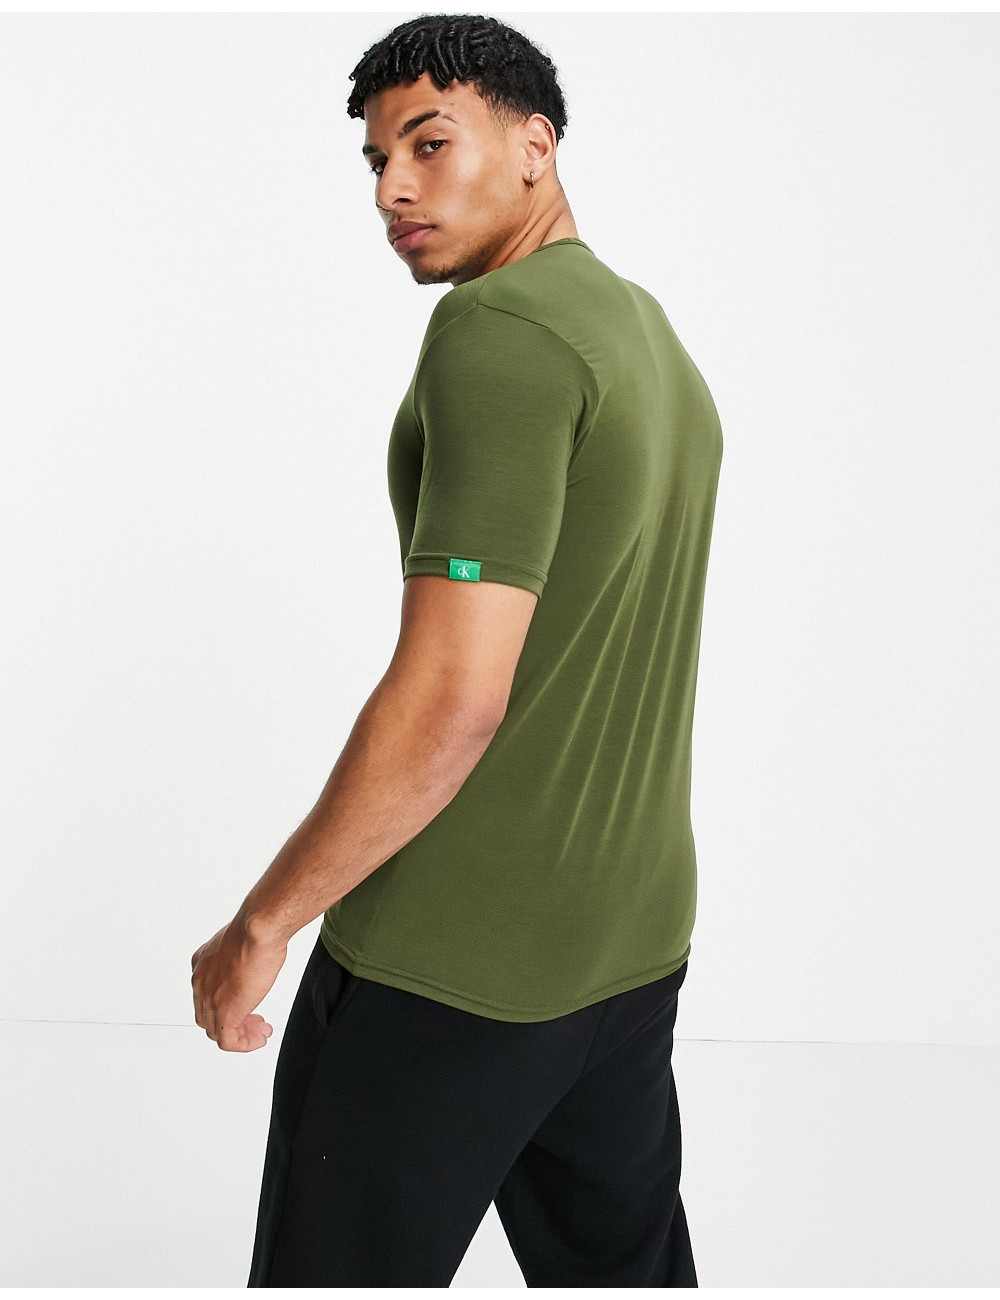 CK One crew t-shirt in green